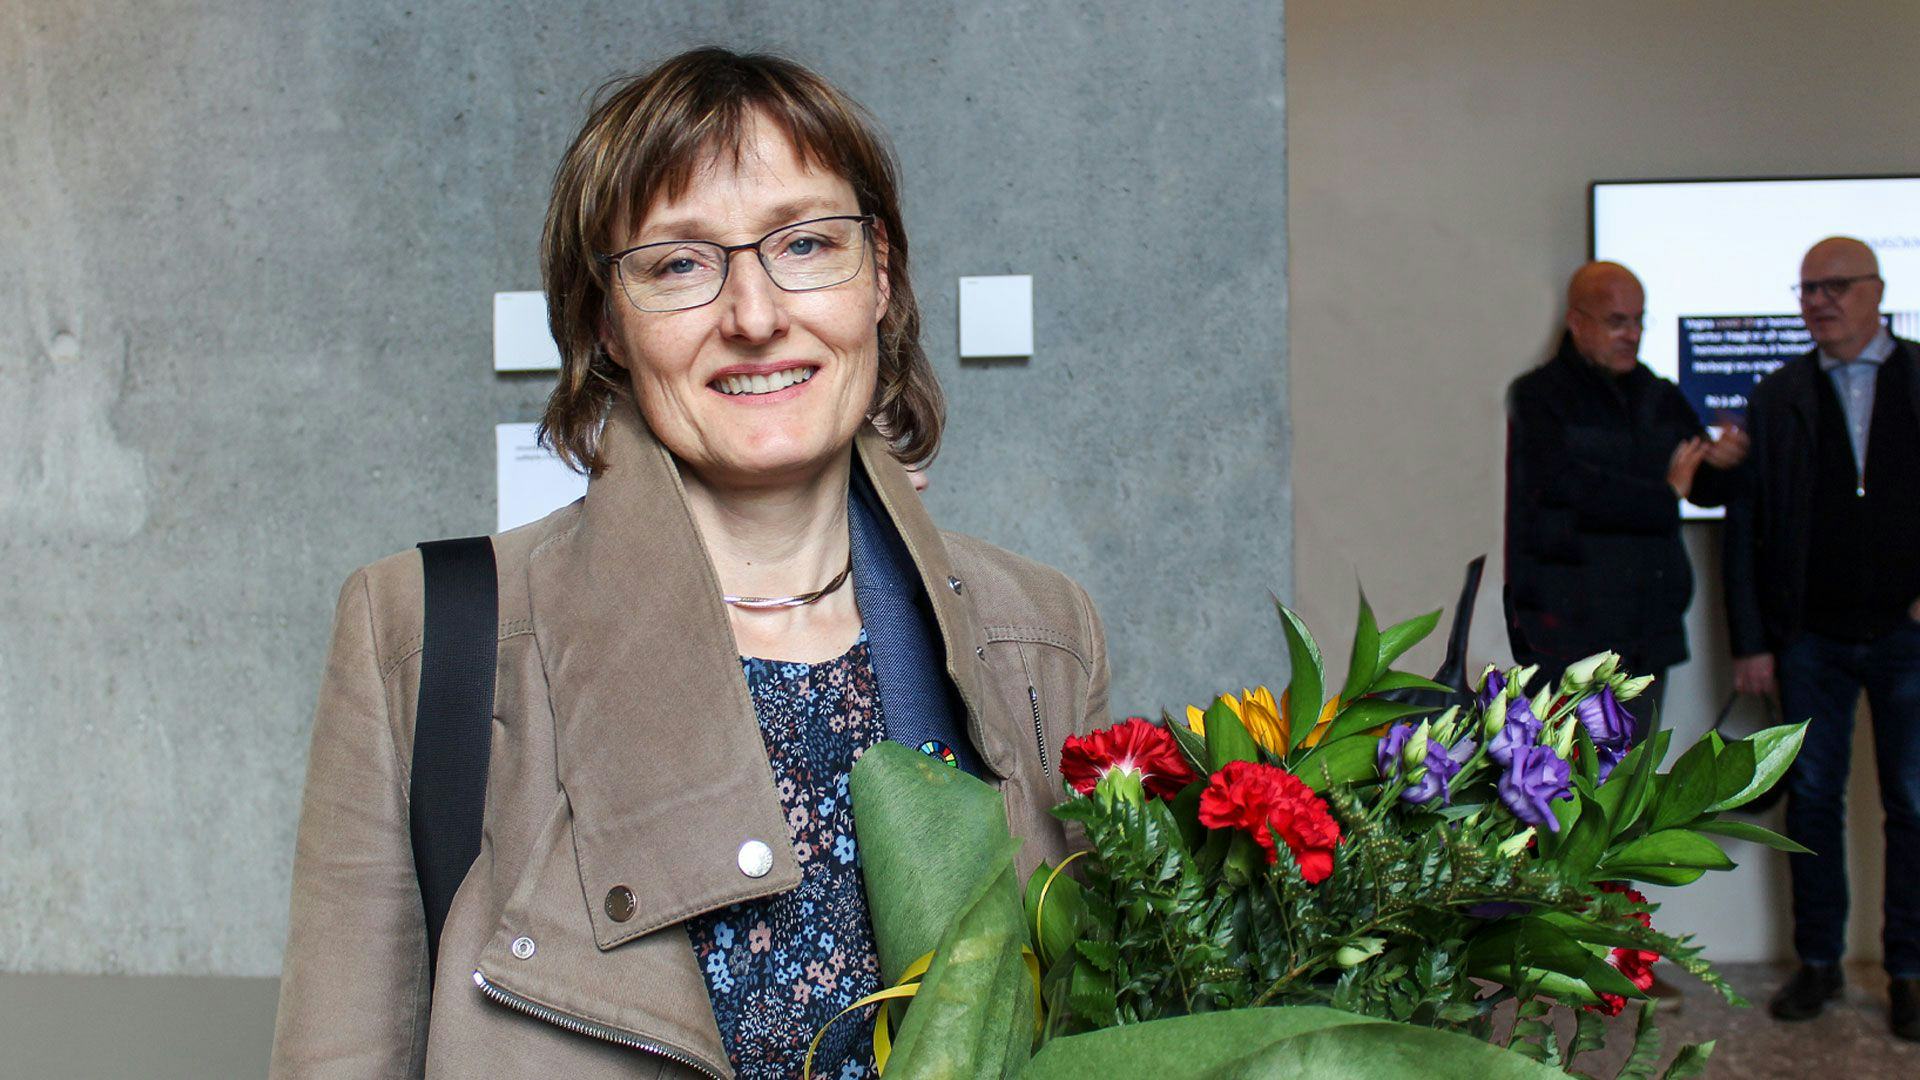 A smiling woman in glasses holding a bouquet of flowers